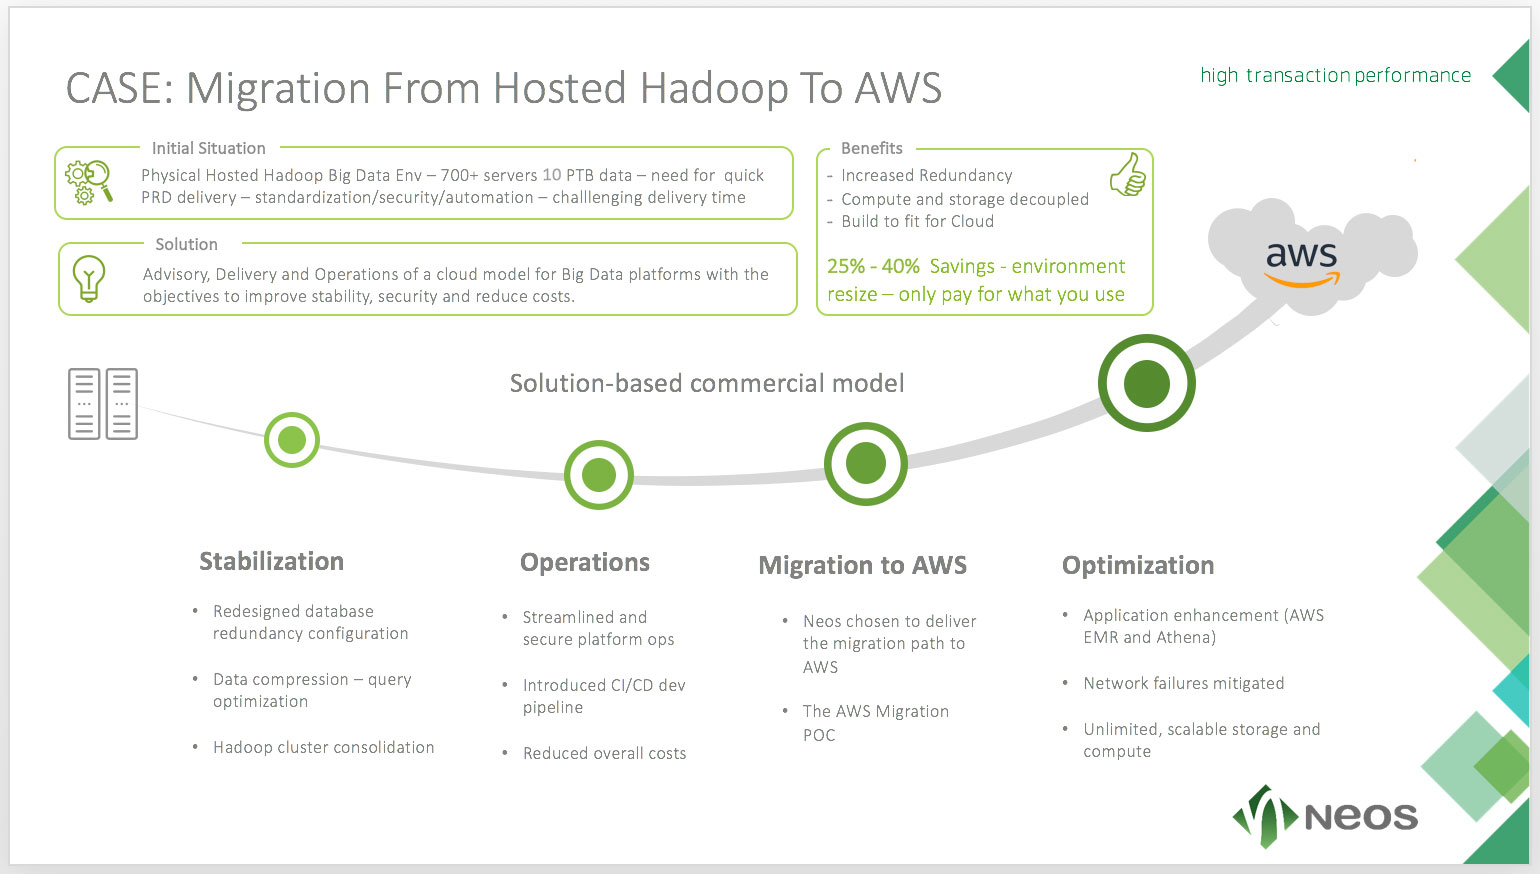 Neos IT Services, CASE: Migration from hosted Hadoop to AWS